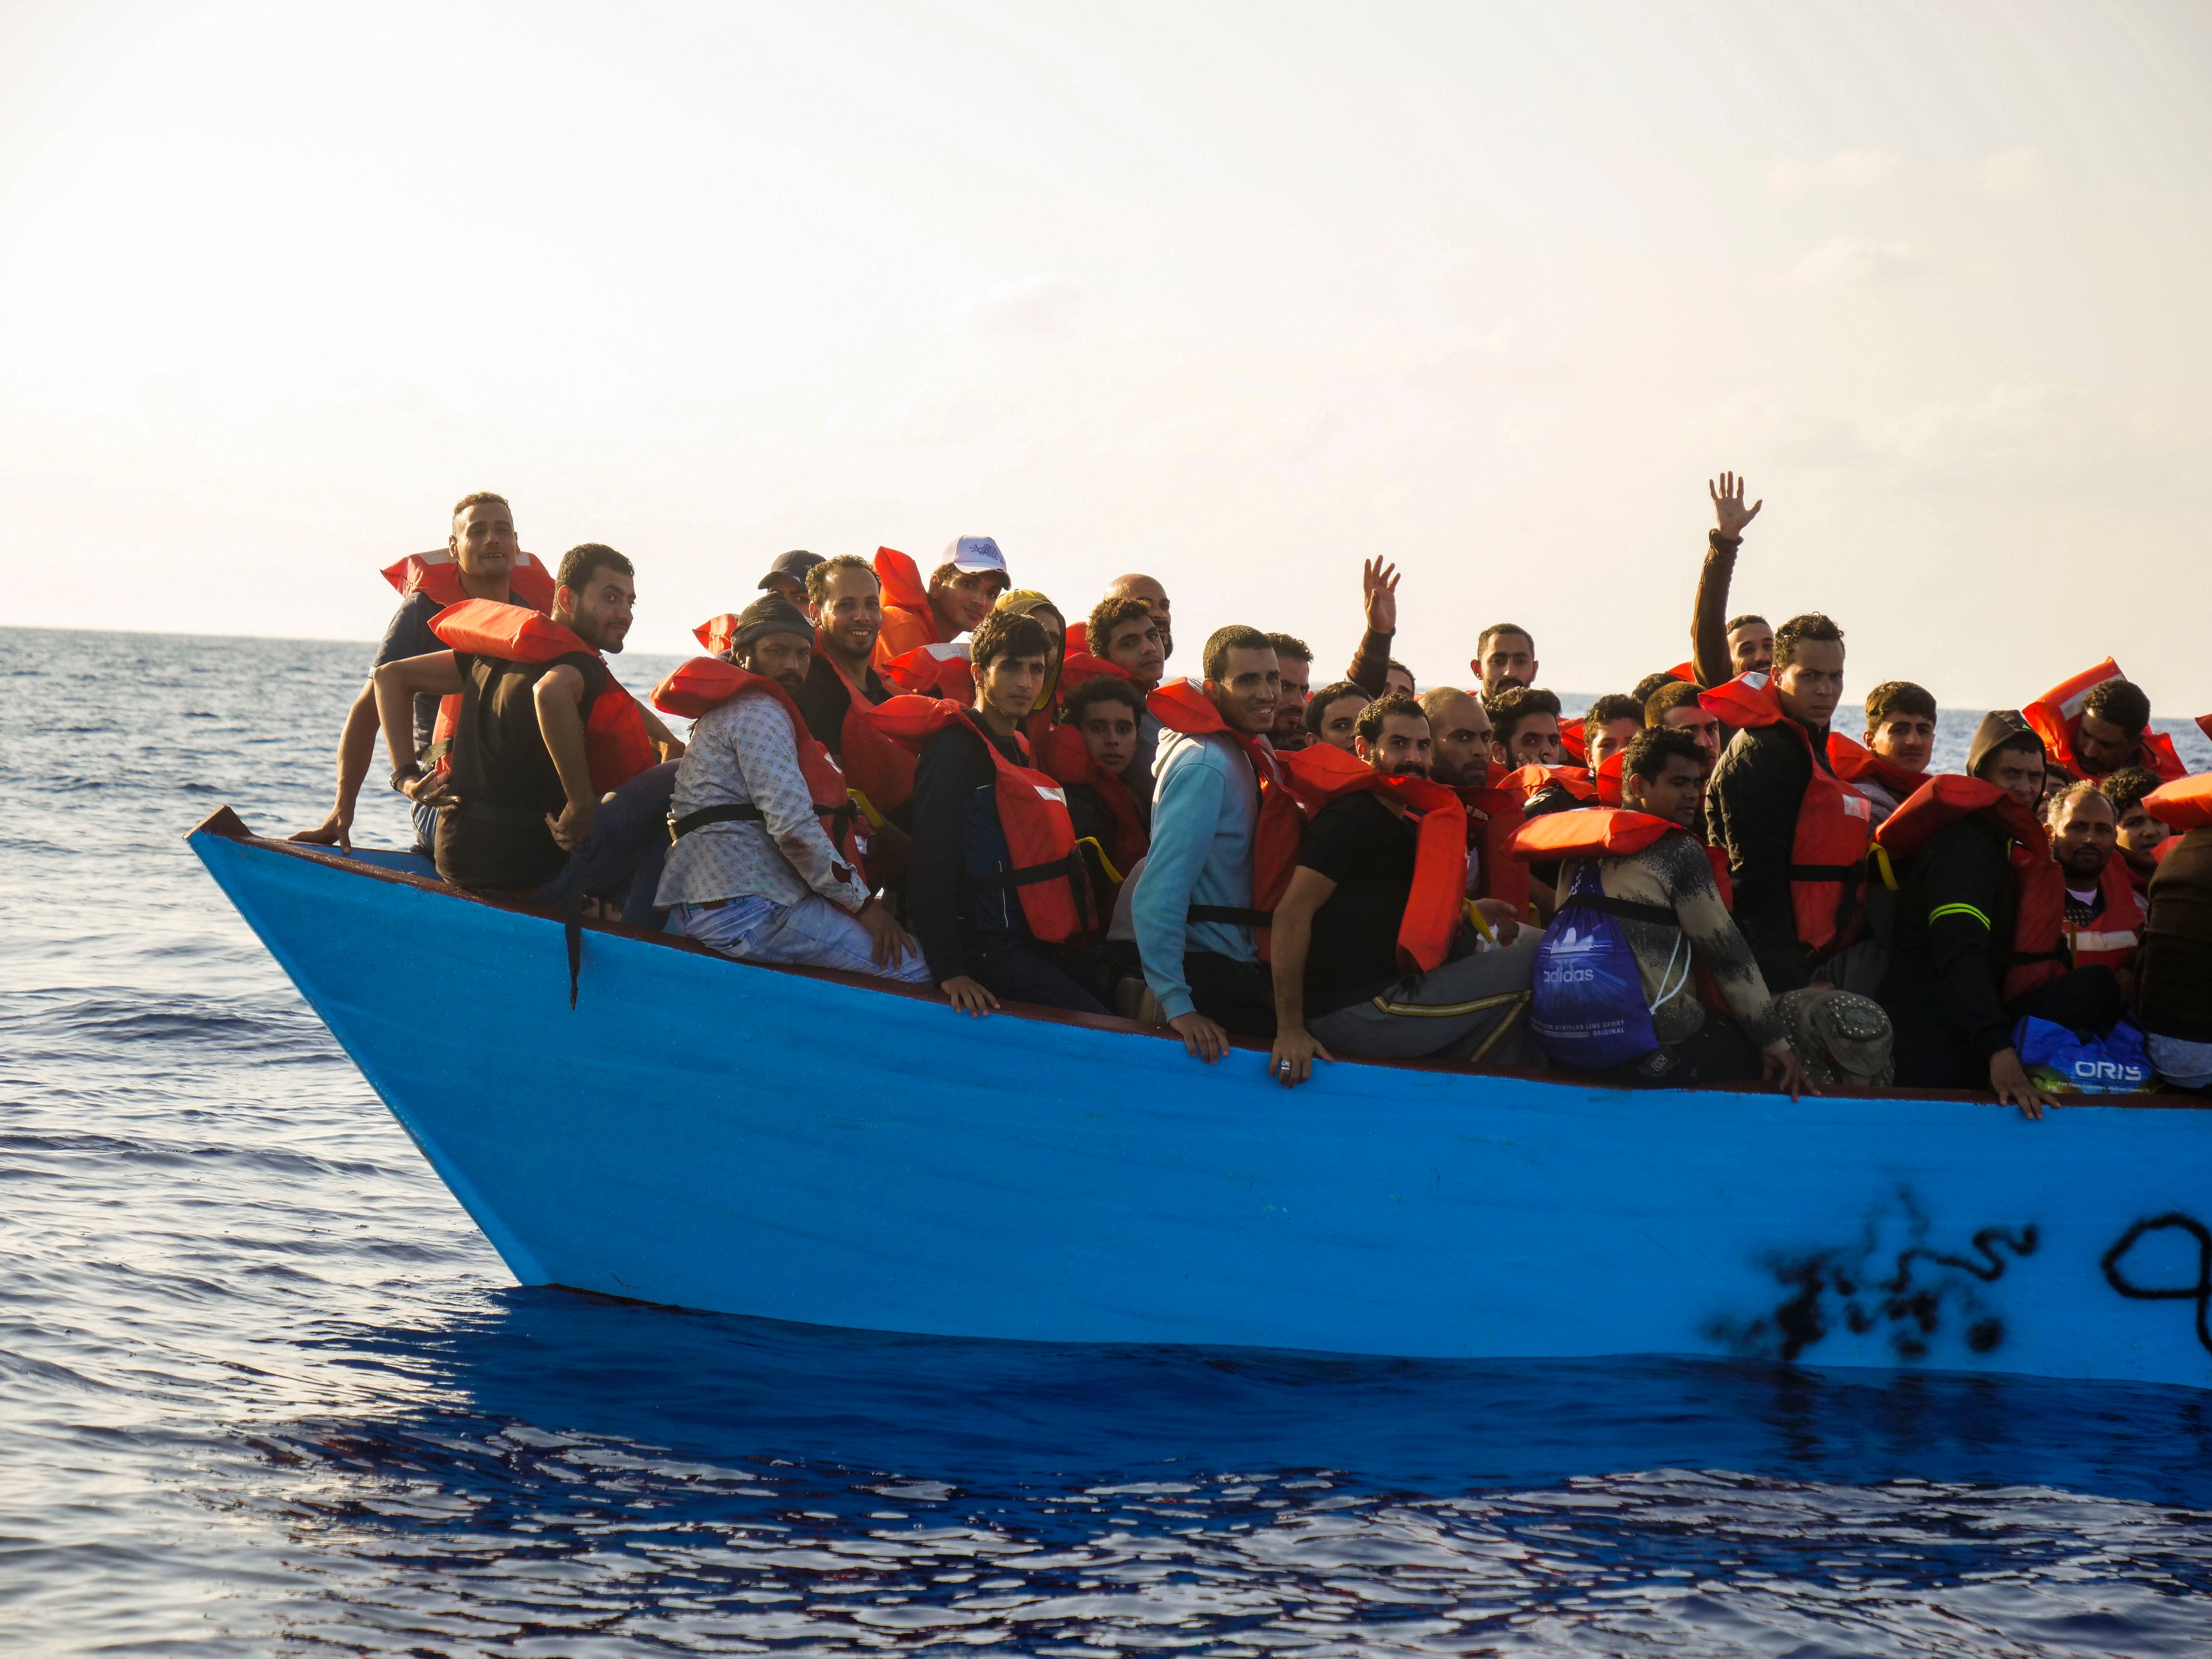 Migrants are rescued from the sea some 30 miles off the coast of Libya and heading for Europe